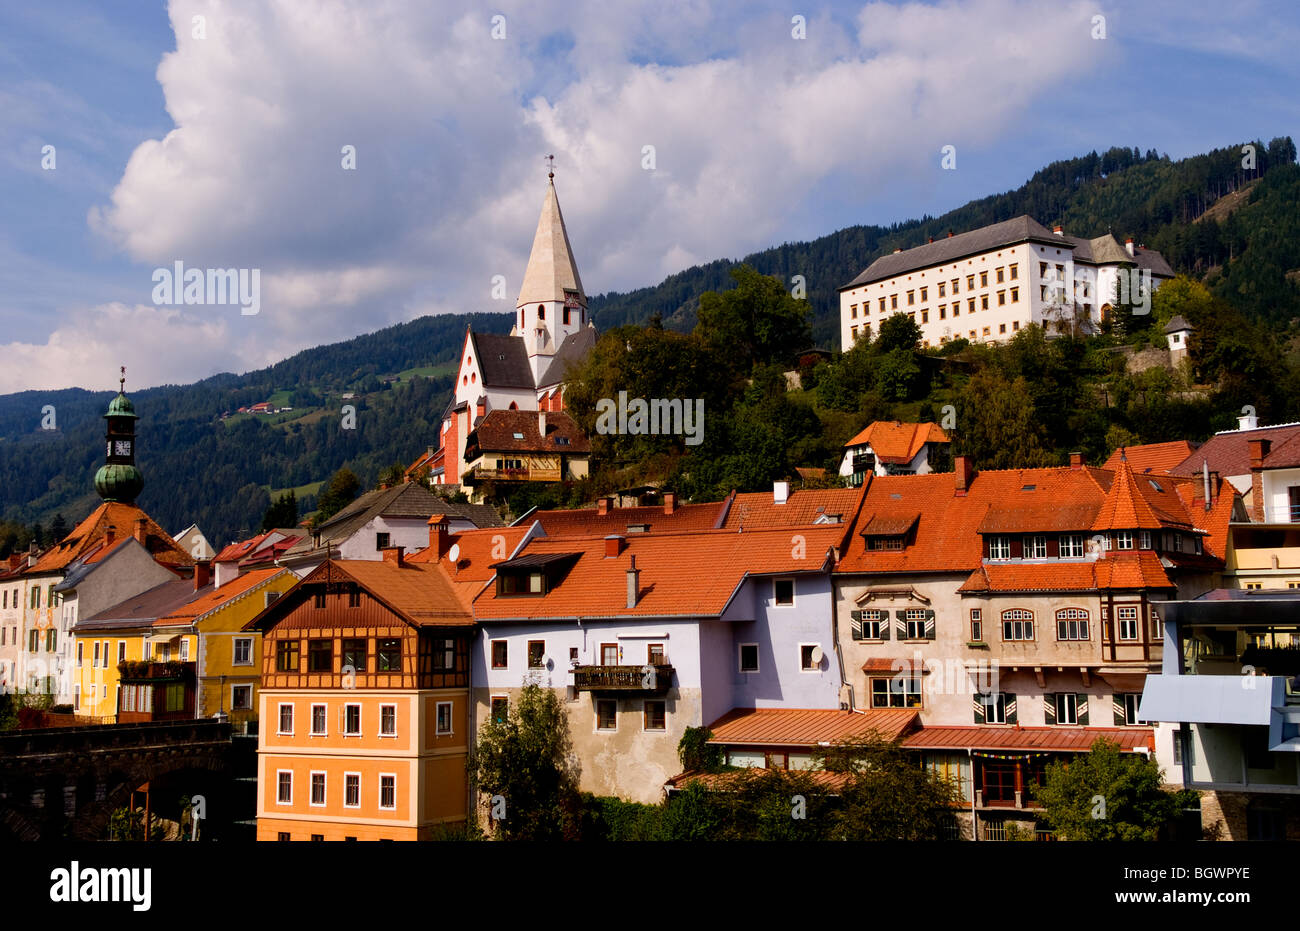 Old historical old town of Murau Austria downtown and churches and Mur River Stock Photo